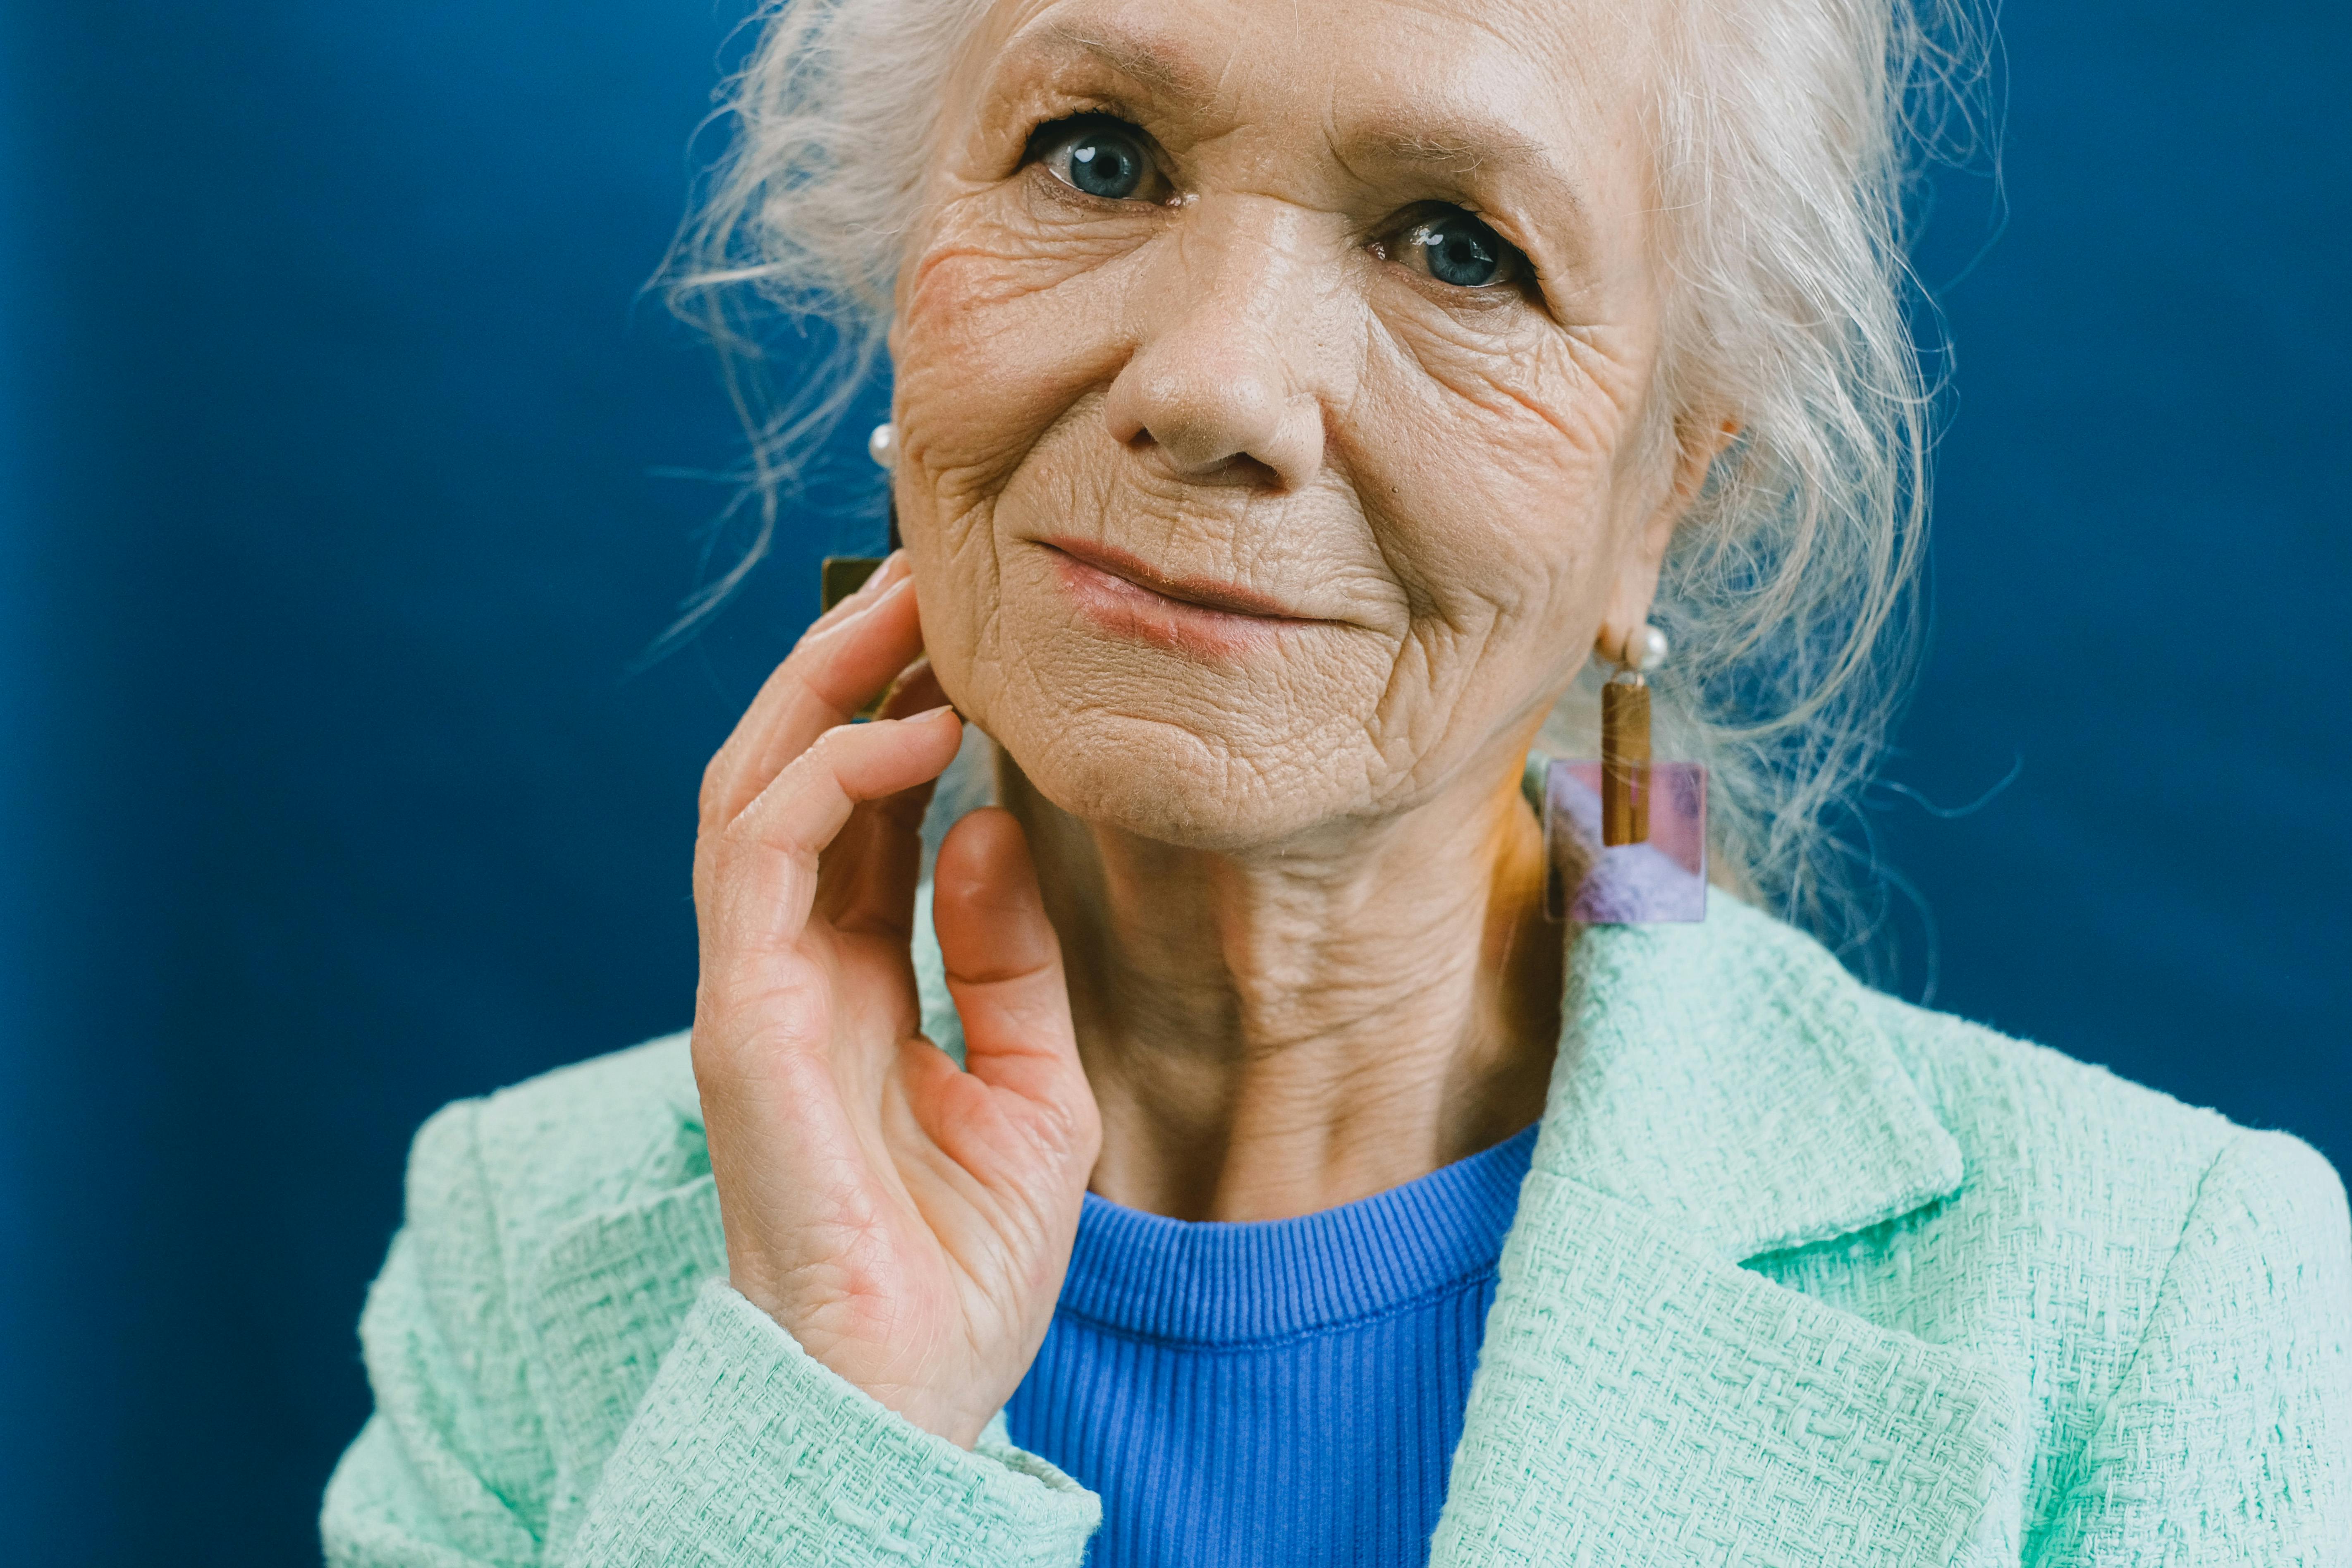 elderly lady touching face against blue backdrop